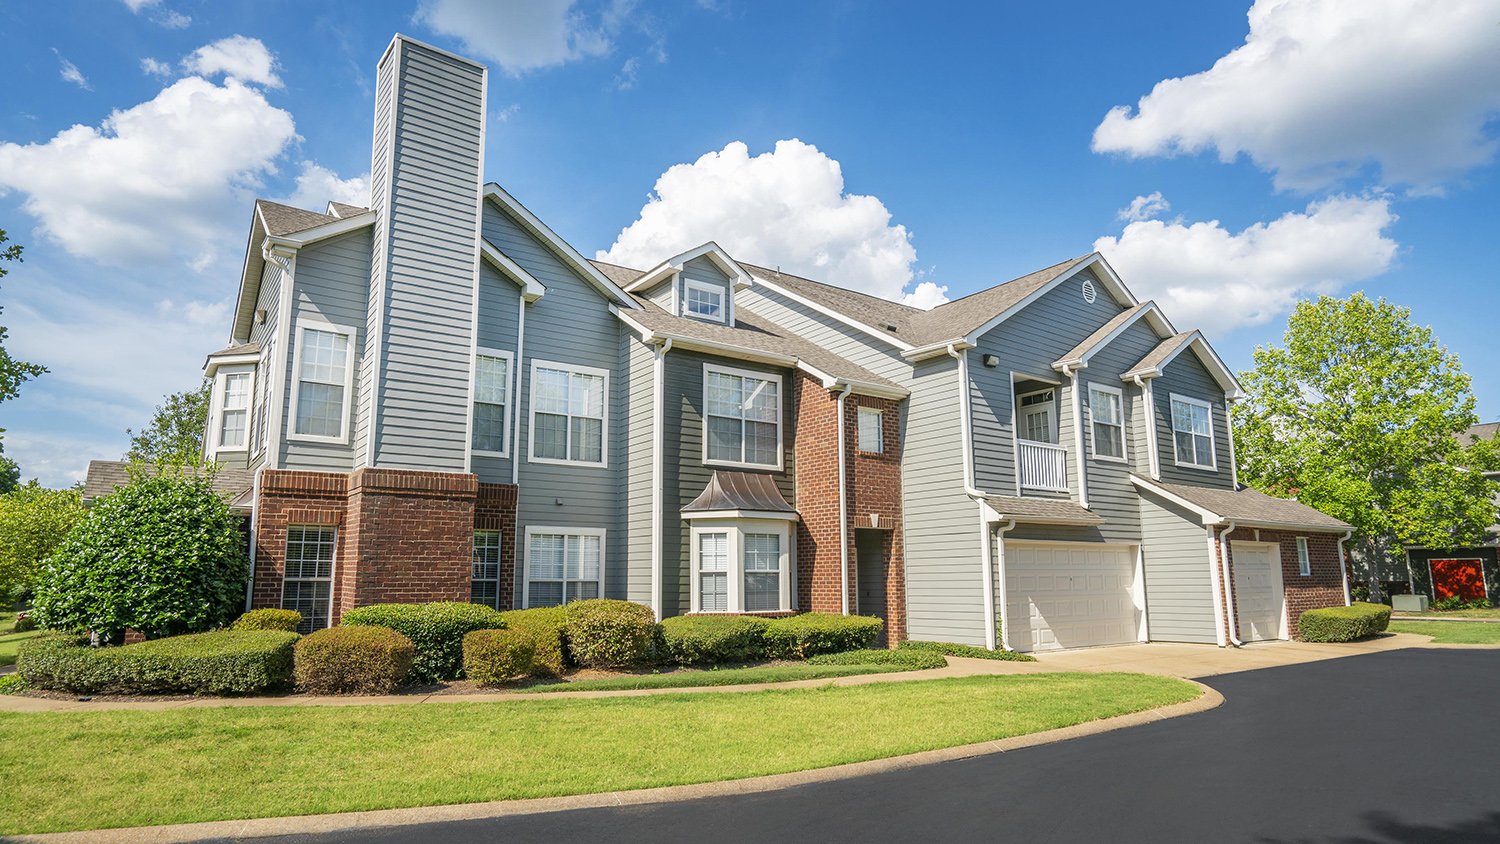 Balfour Beatty Communities expands in Memphis with second area multifamily acquisition in 2019